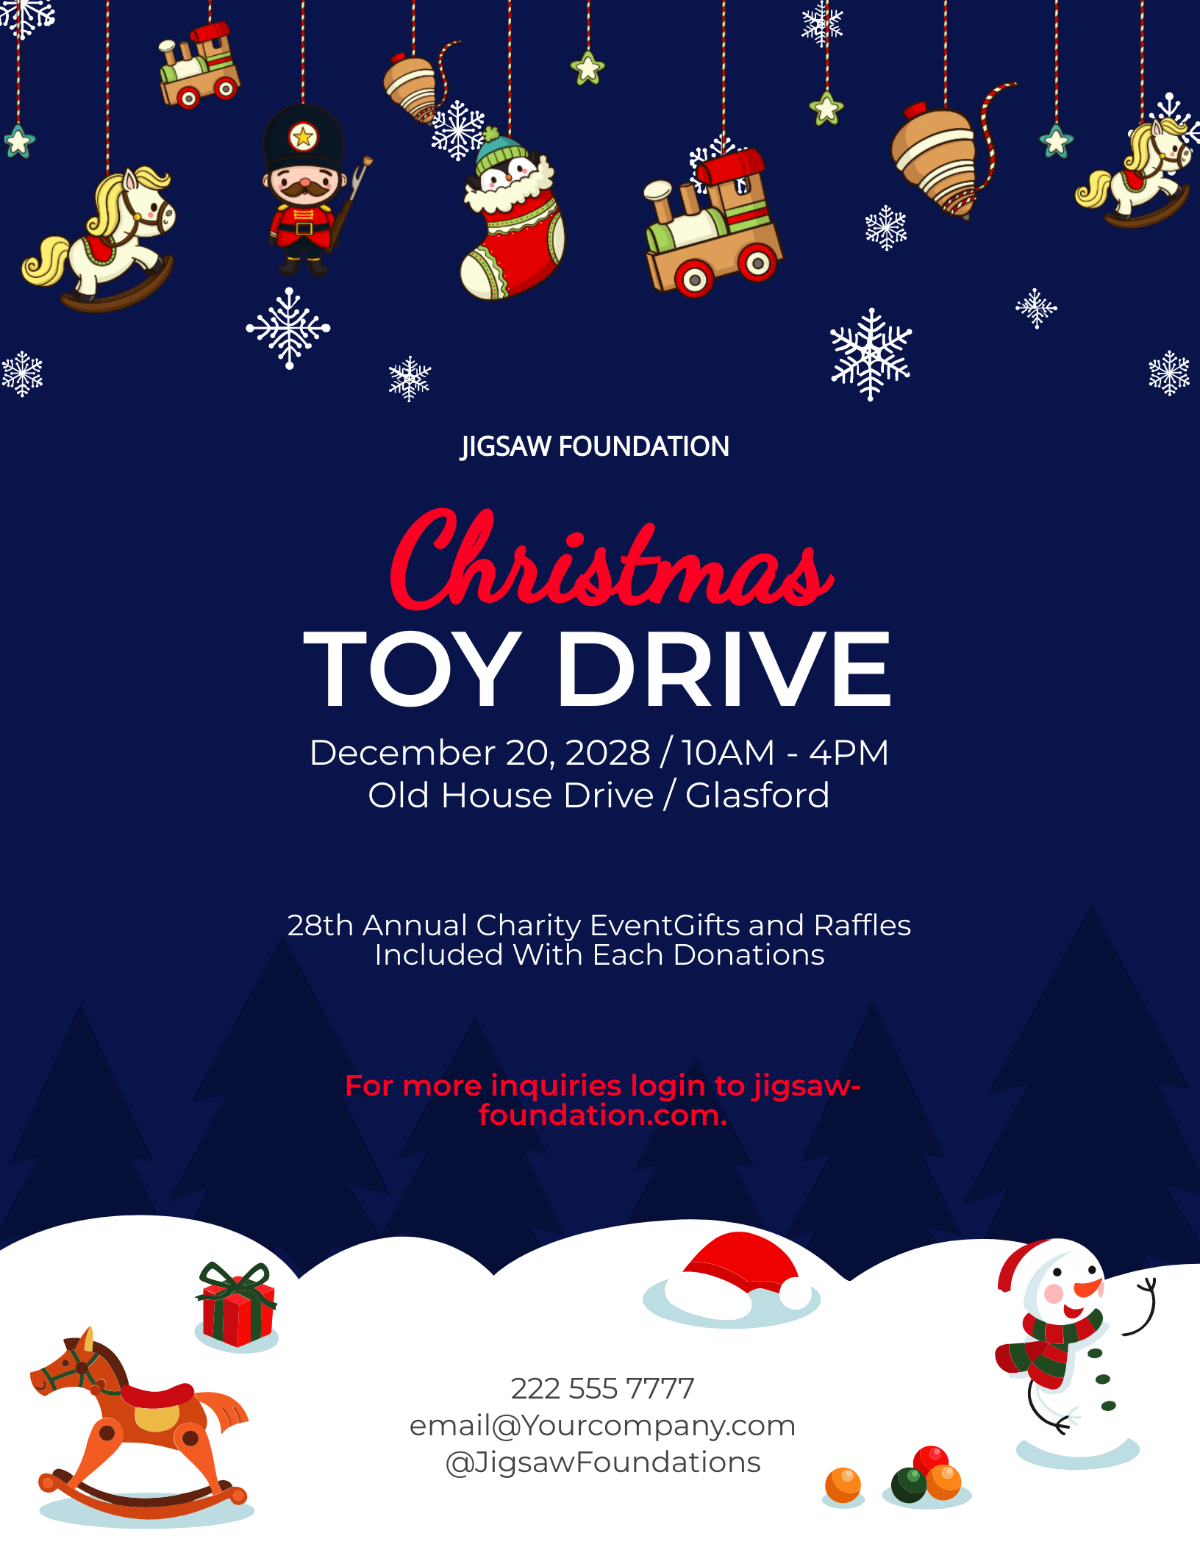 Toy Drive Christmas Flyer